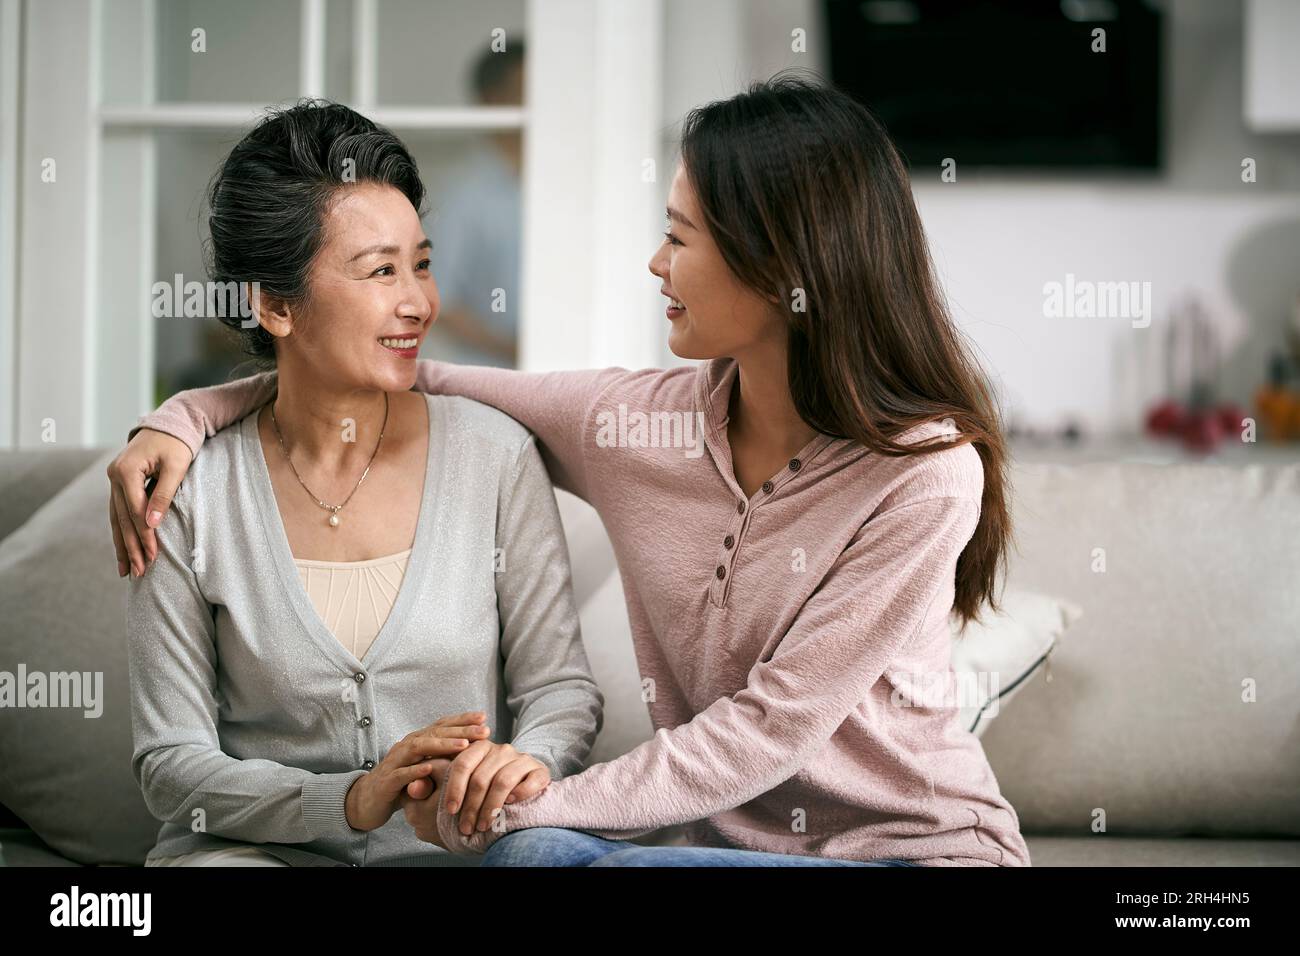 asian adult daughter and senior mother sitting on couch at home having a pleasant conversation Stock Photo